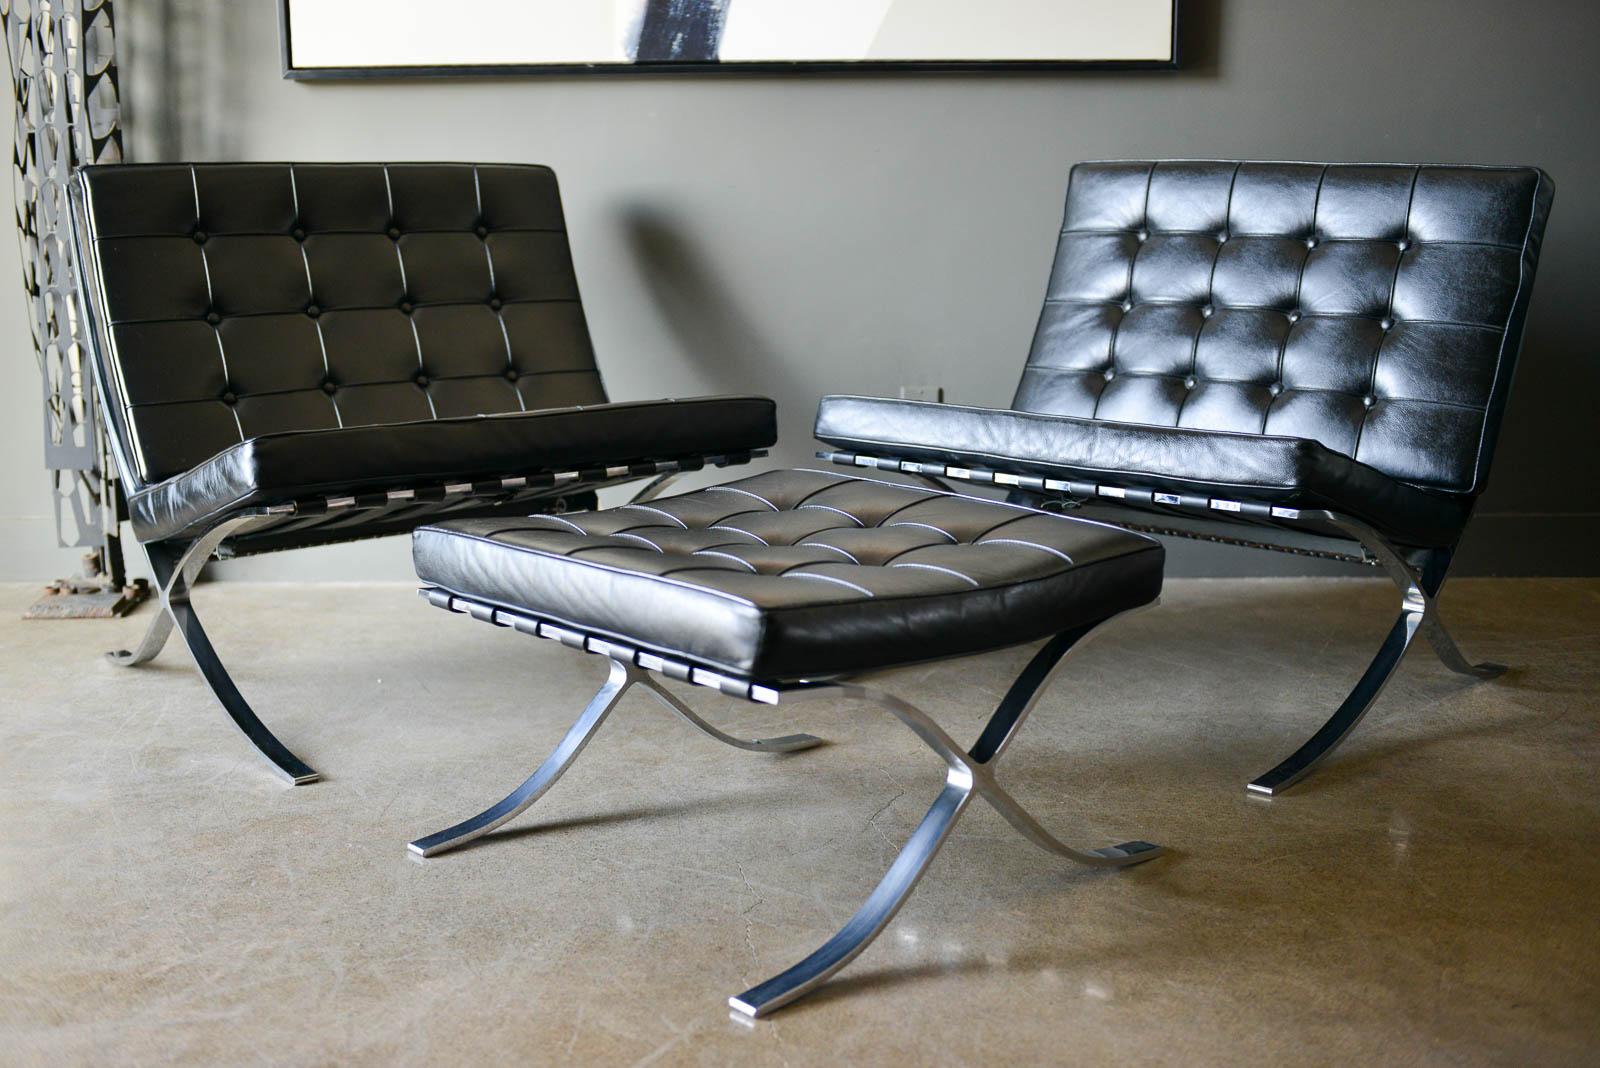 Pair of Original Mies Van Der Rohe Barcelona chairs with ottoman for Knoll. Original black leather cushions with very slight wear as shown otherwise excellent. Polished chrome frames. Includes matching ottoman.

Chairs measure H 30.25